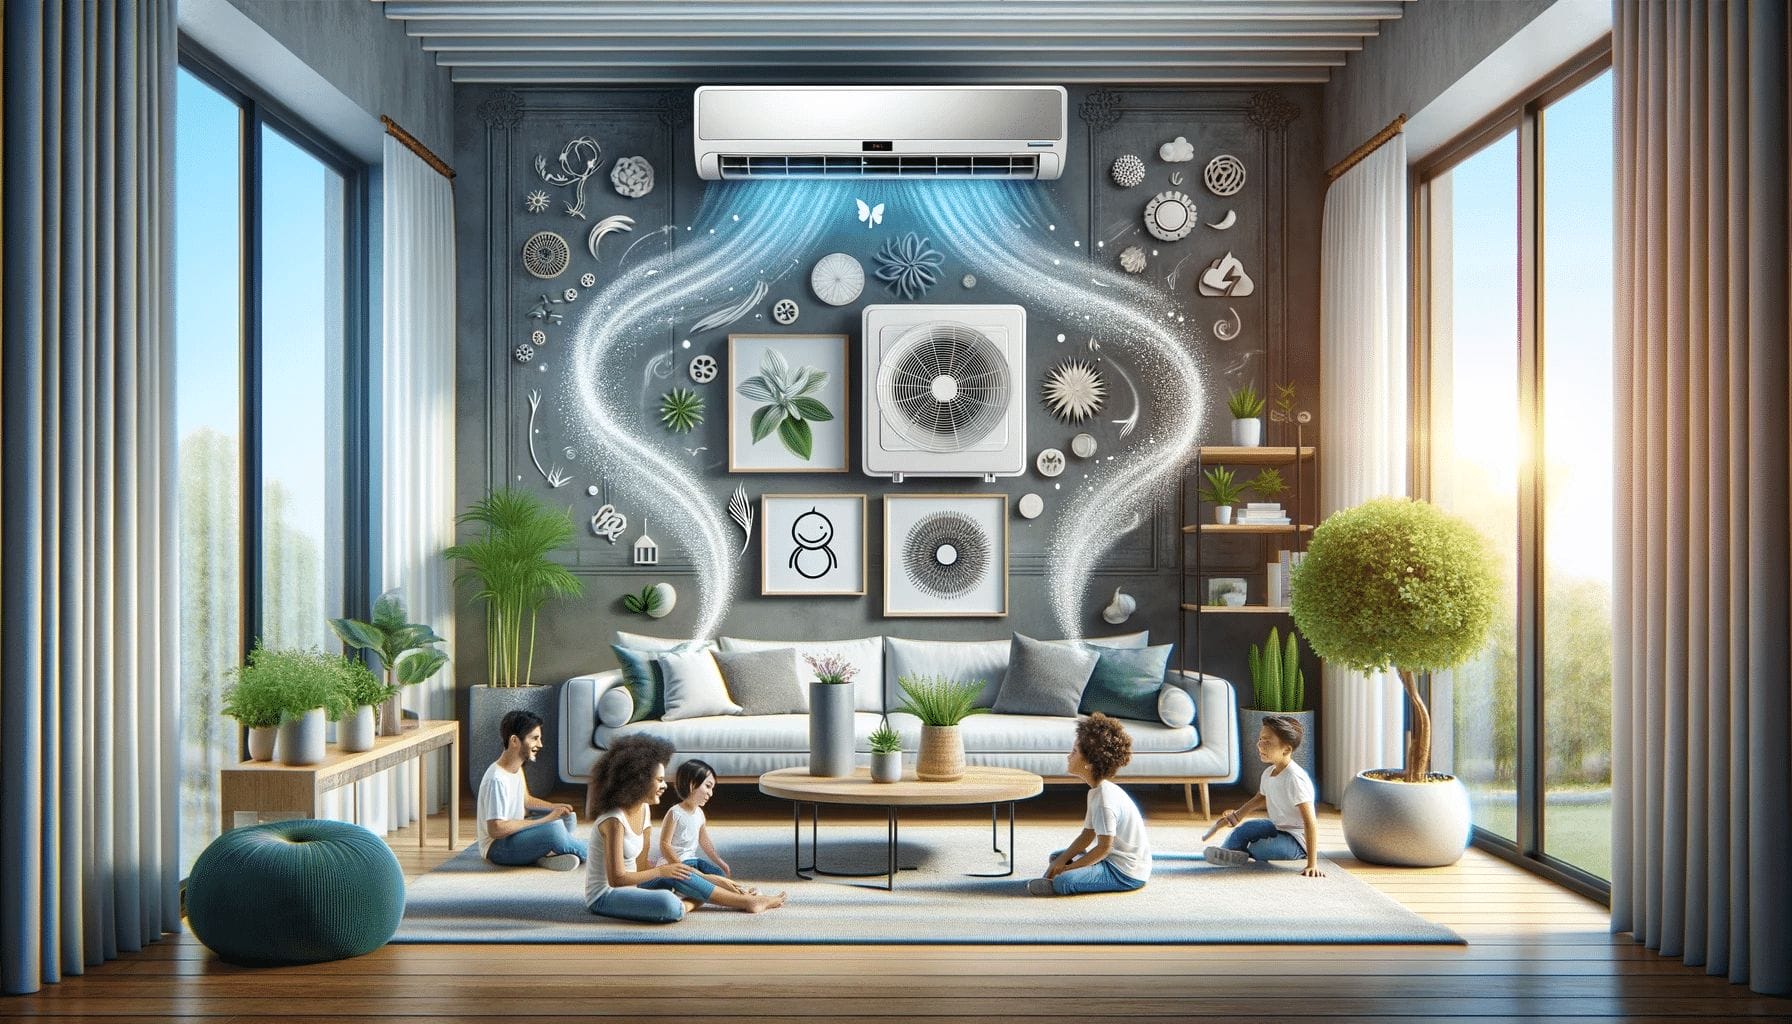 A living room with an air conditioner in the background.